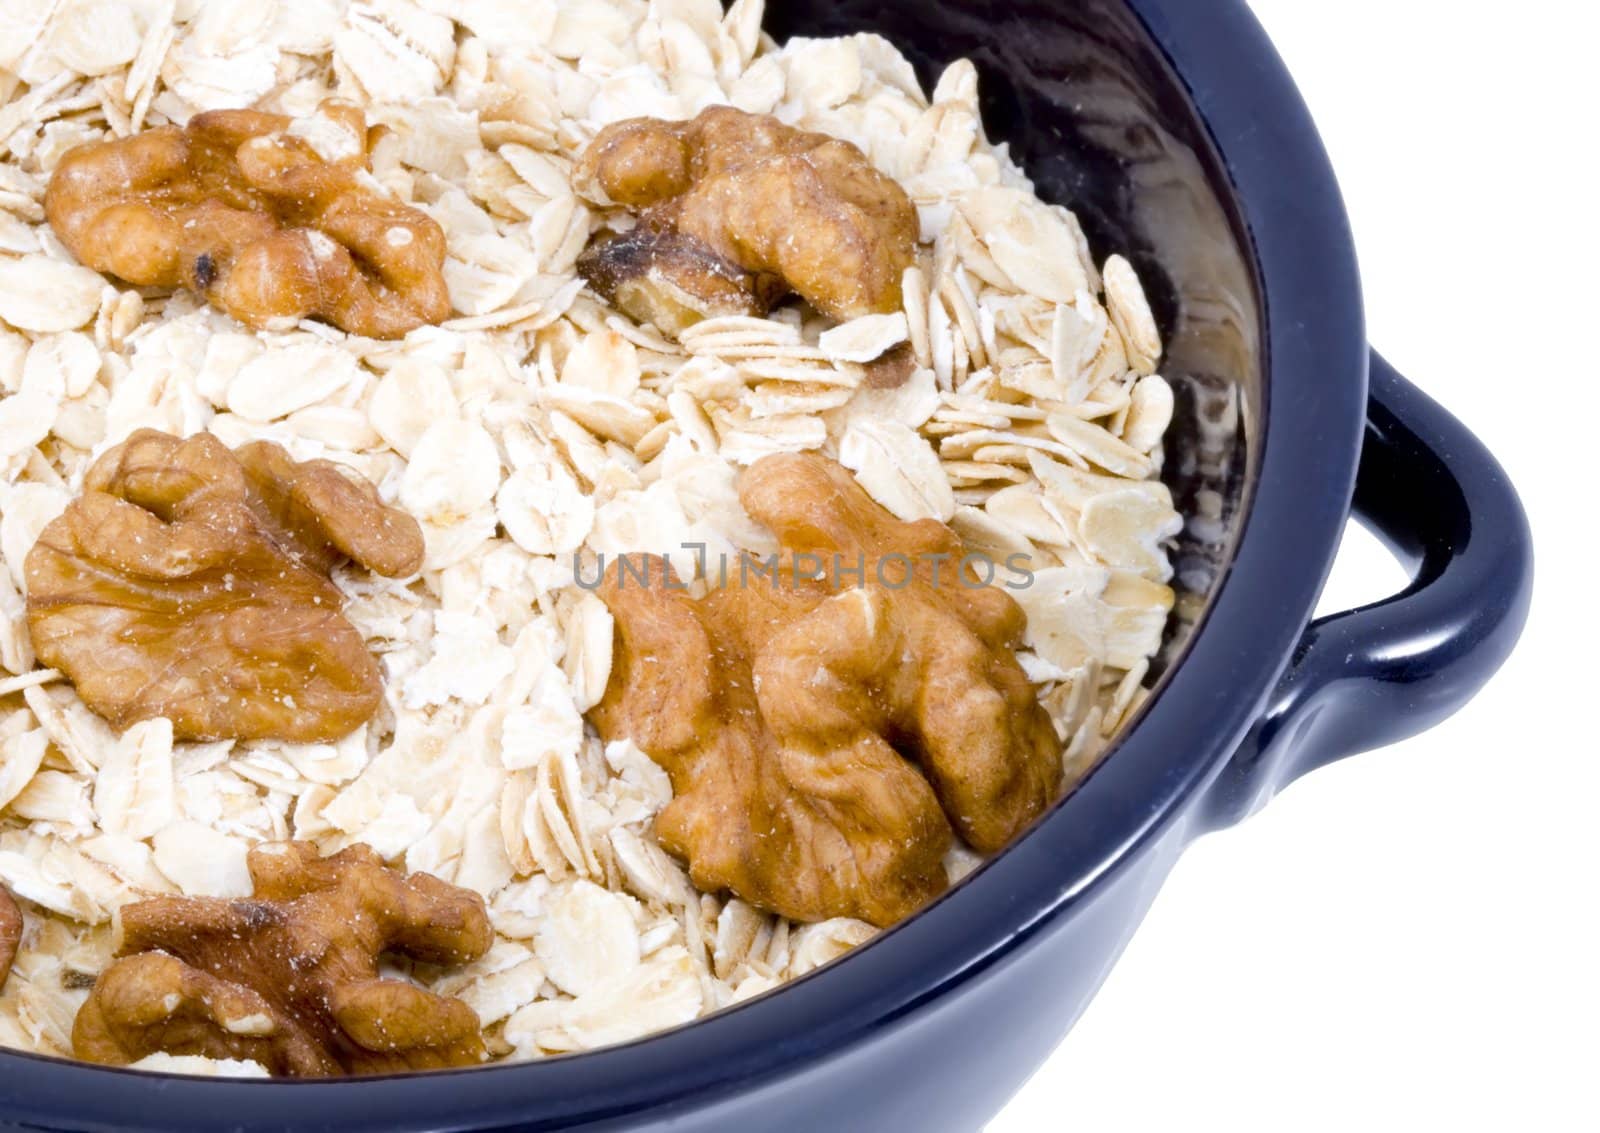 a bowl of oatmeal with walnuts - healthy diet